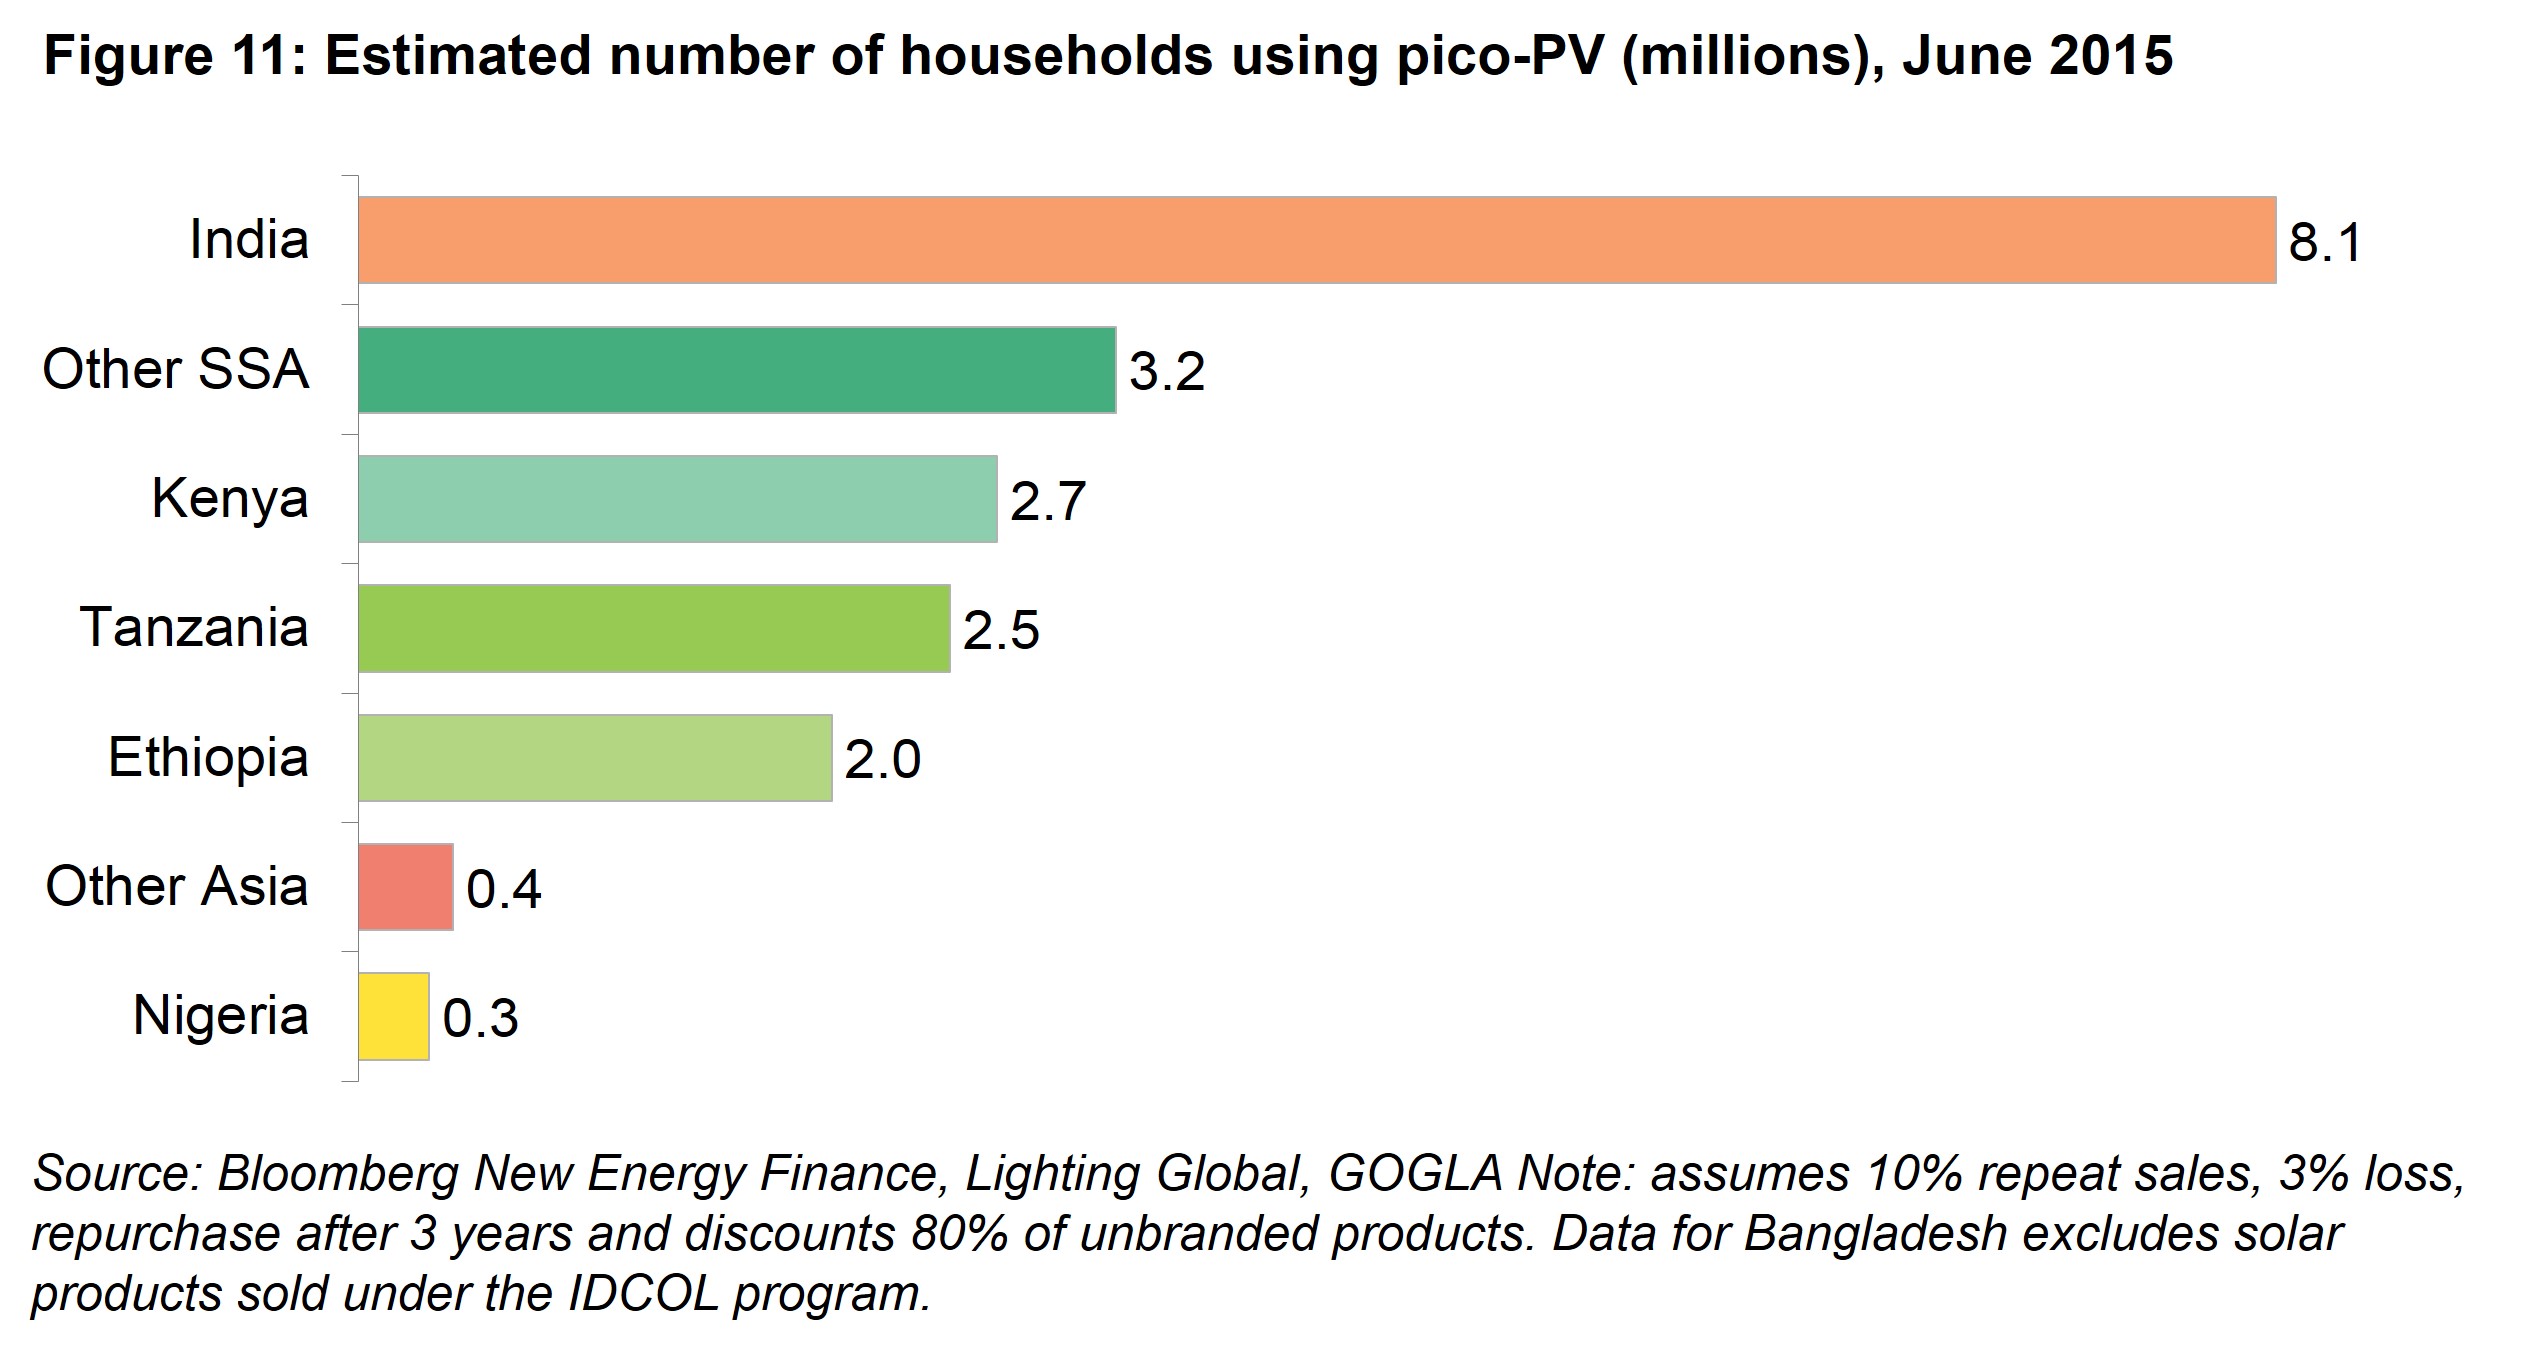 AM Fig 11 - Estimated number of households using pico-PV (millions), June 2015